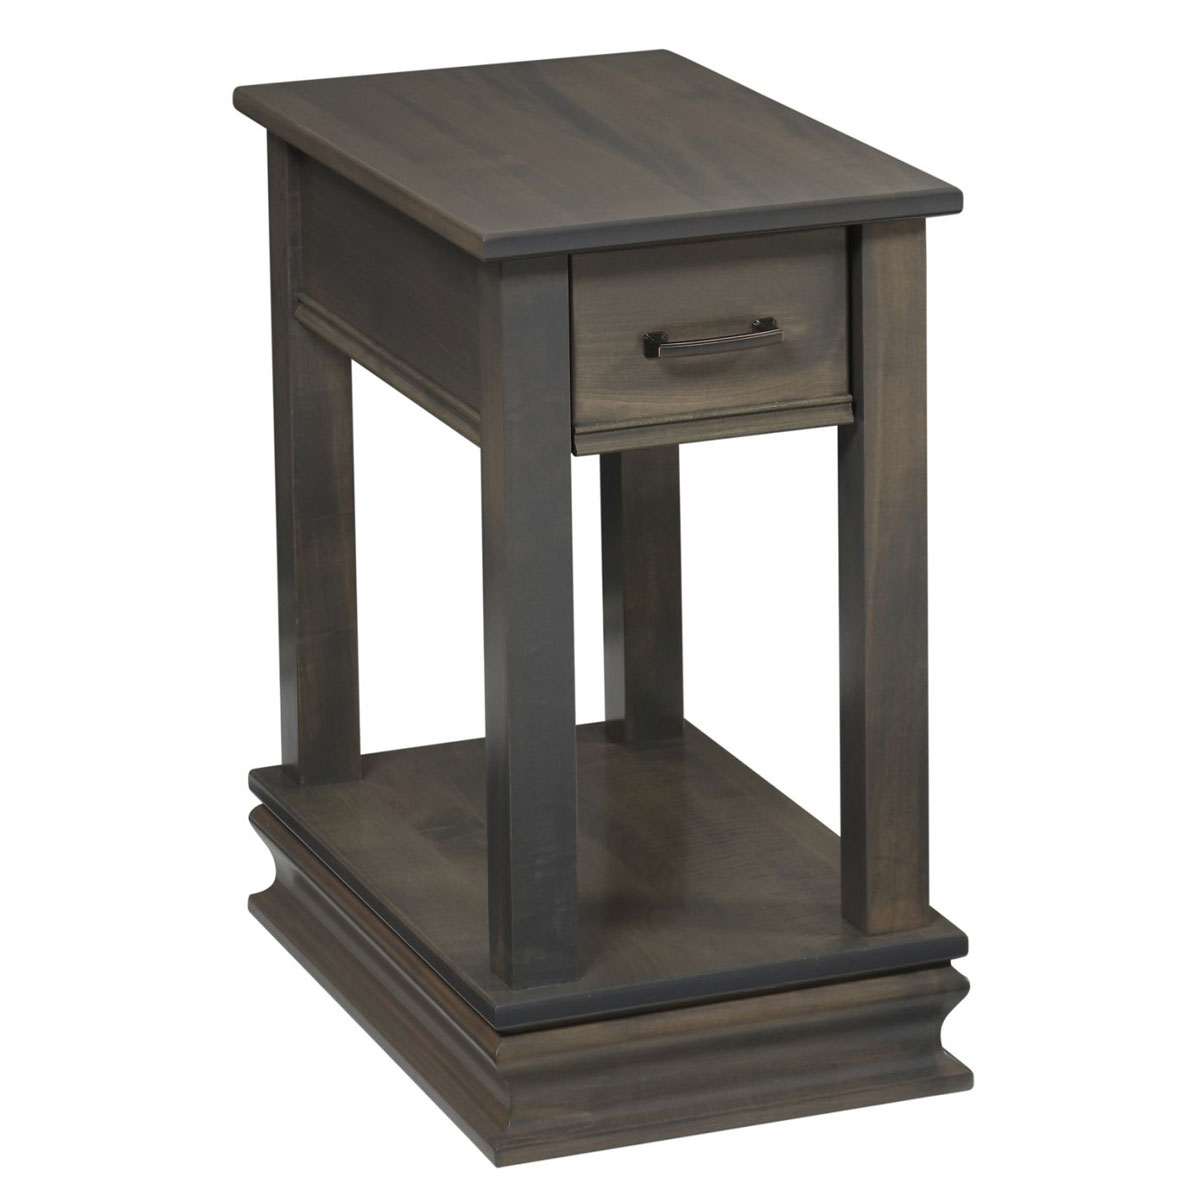 Burlington Chairside End Table shown in Brown Maple with OCS-121 Smoke Finish. 